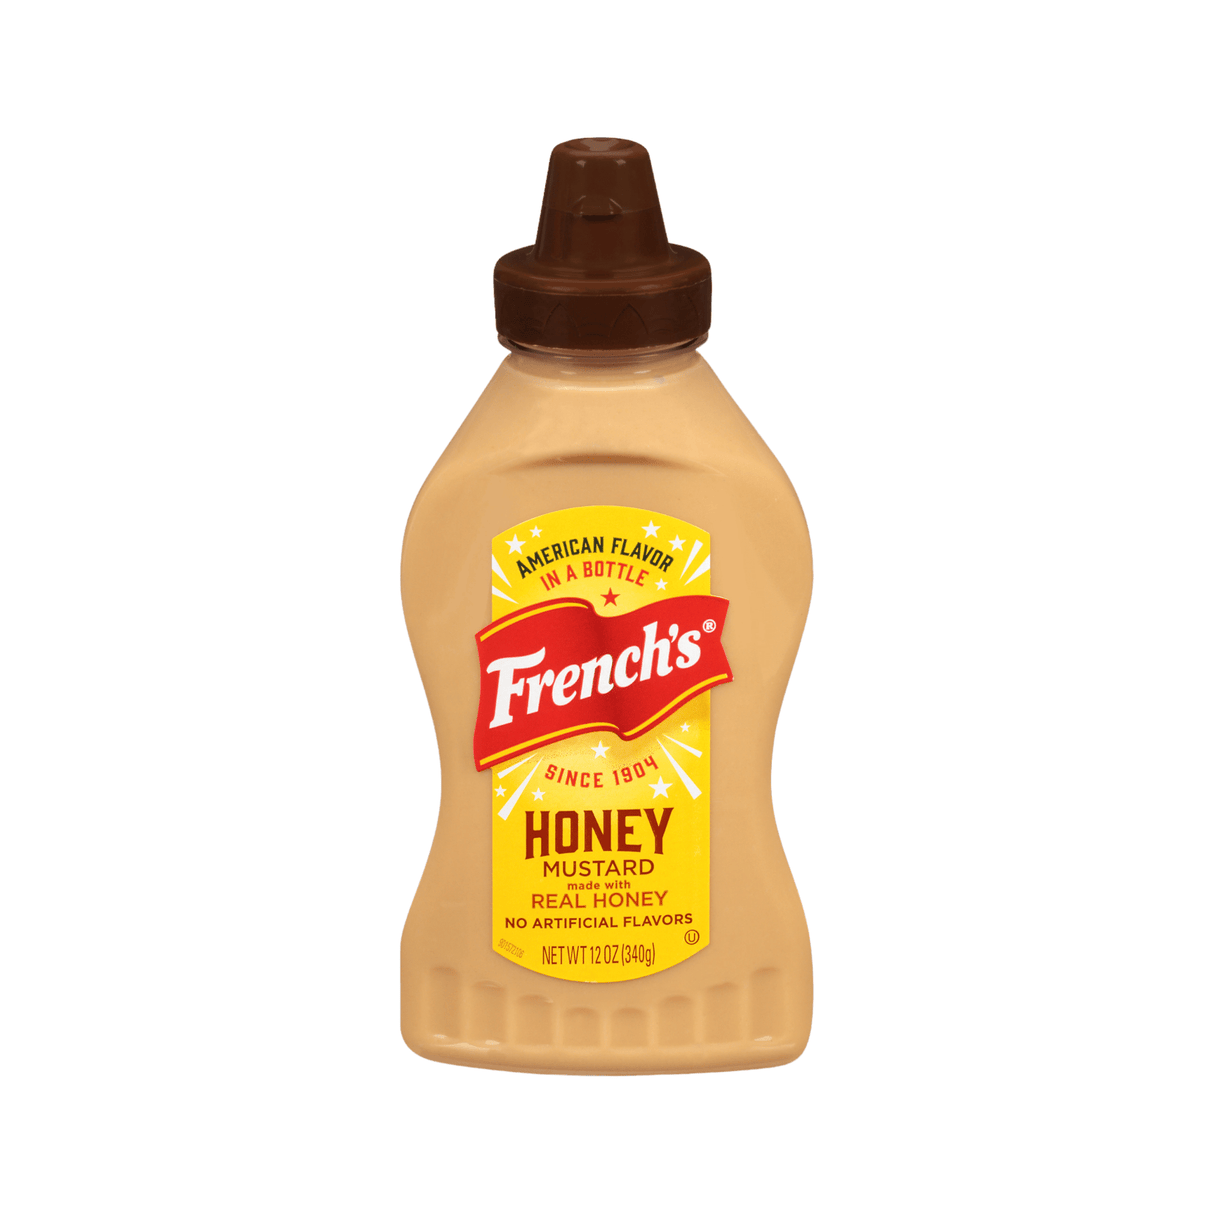 French’s Honey Mustard made with Real Honey